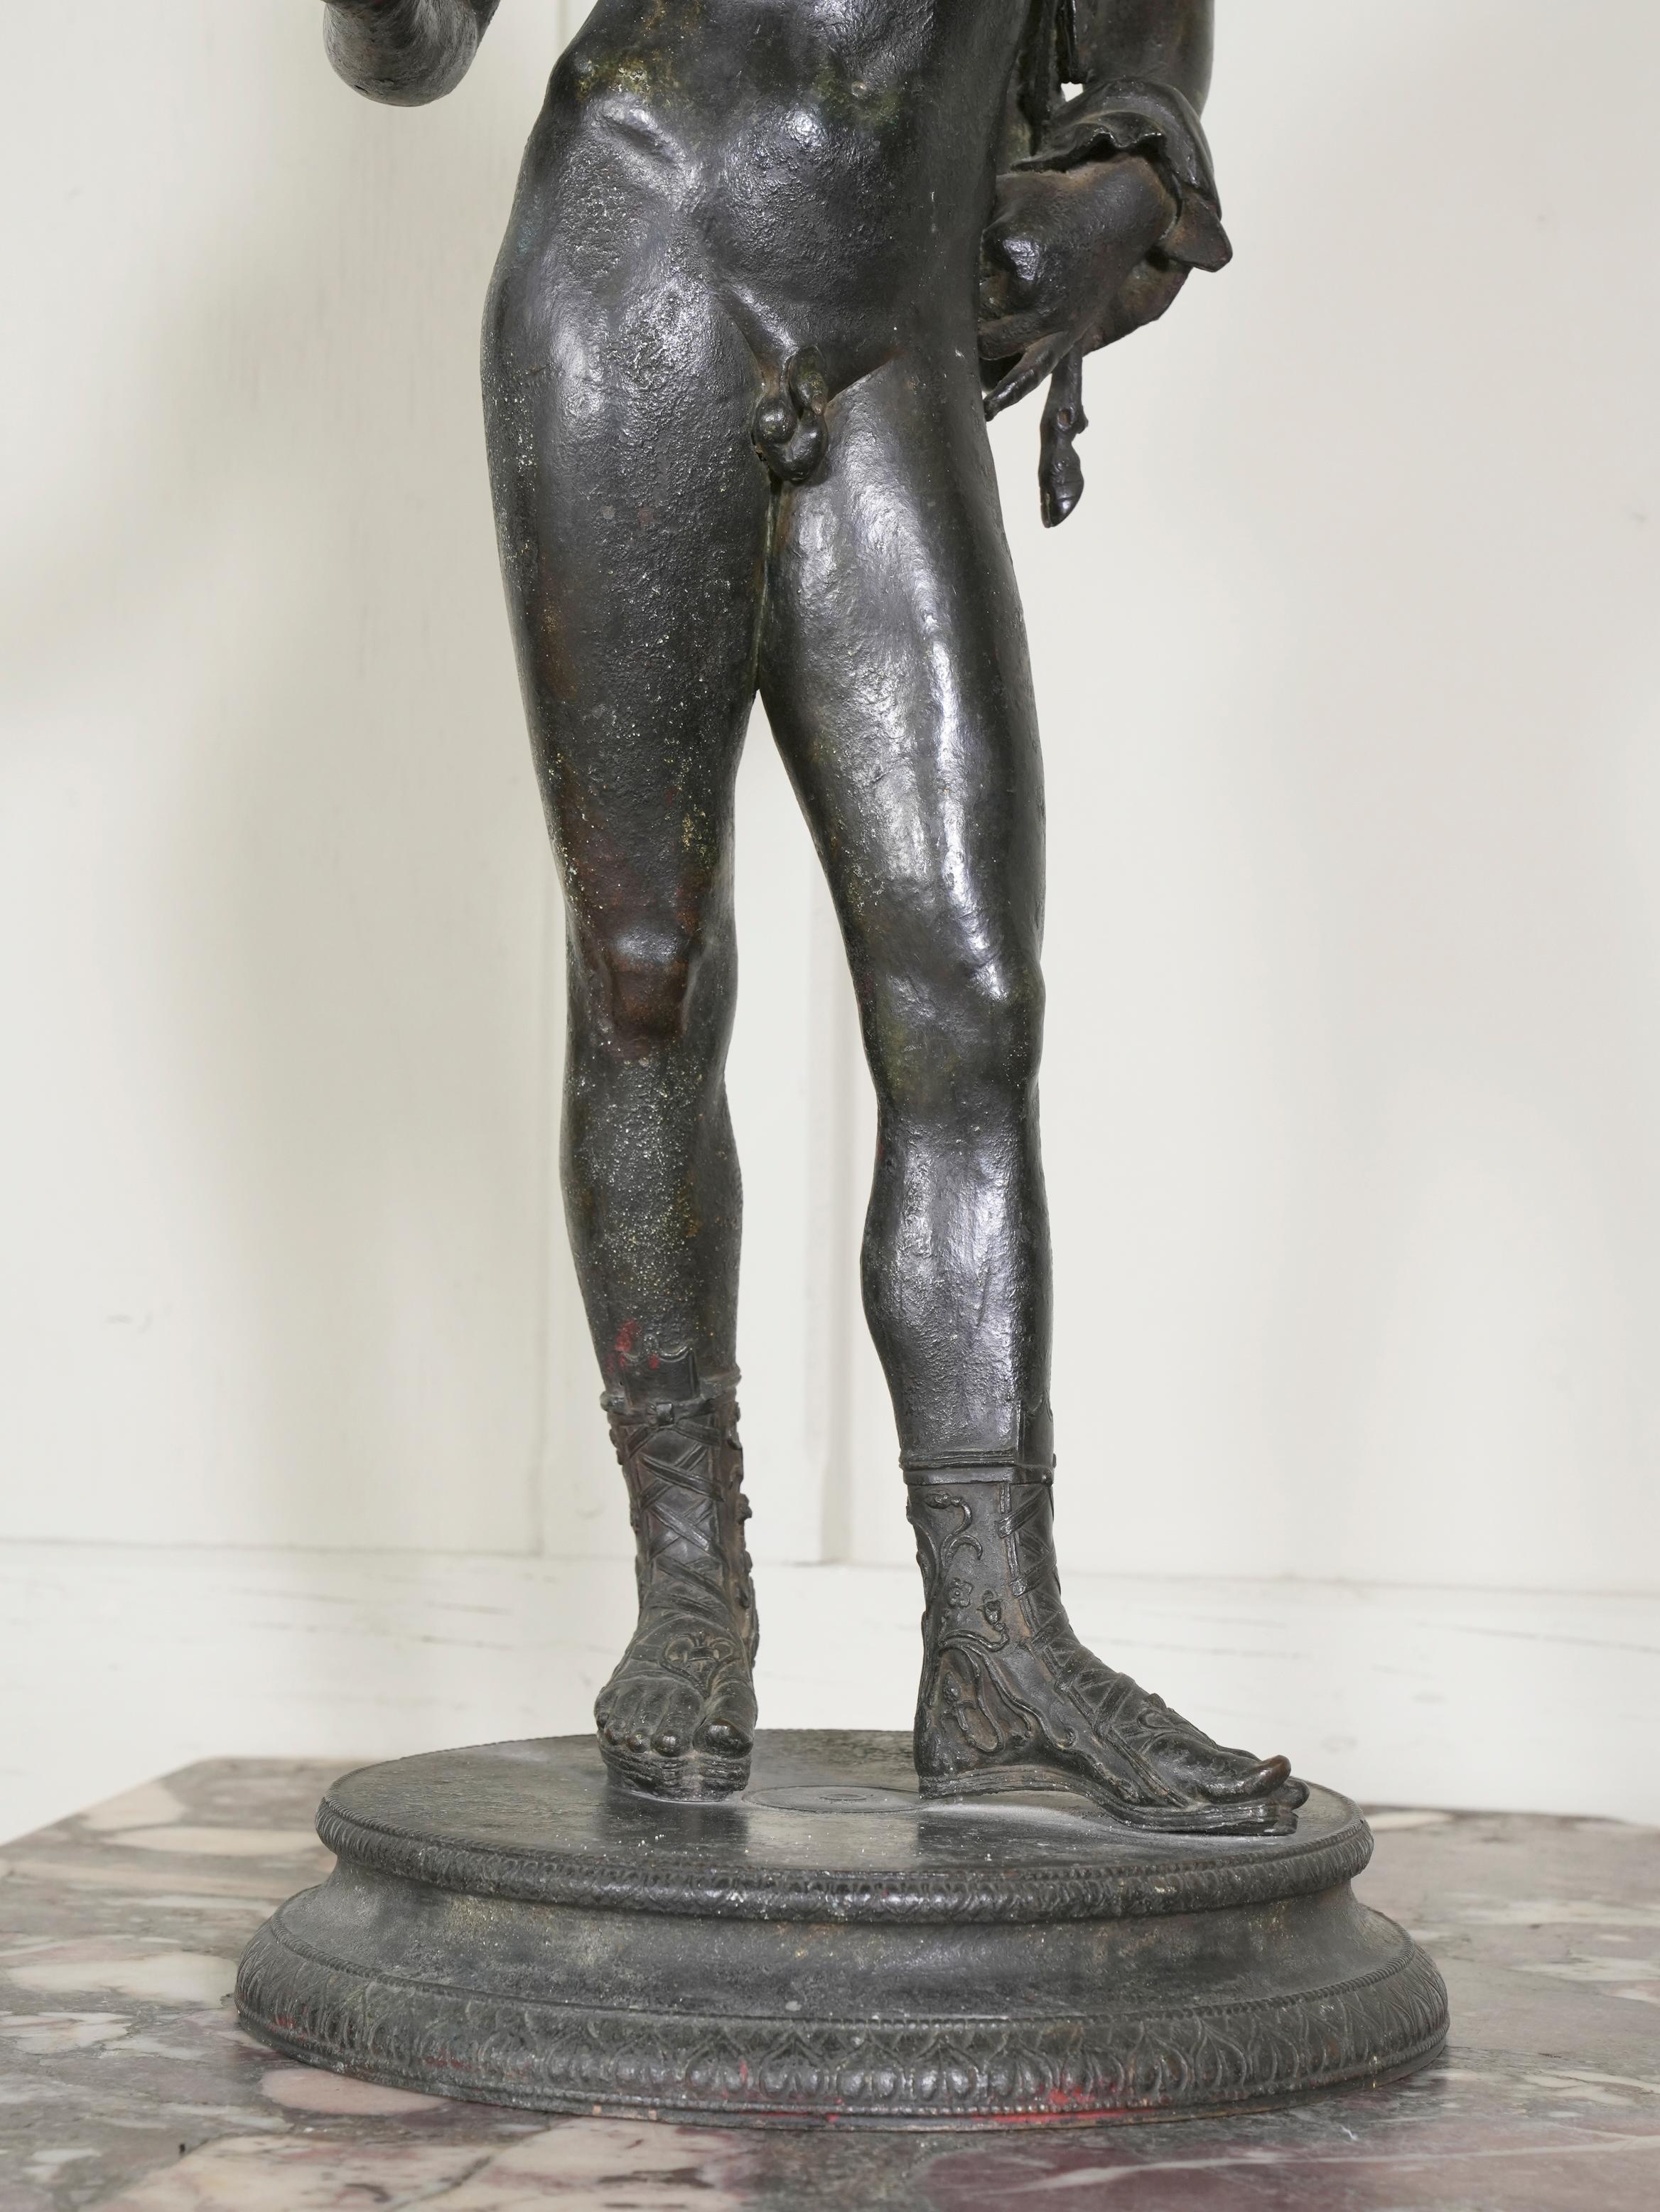 A large Neapolitan bronze of Narcissus, after the antique by Sabatino De Angelis & Fils foundry. 

Signed 